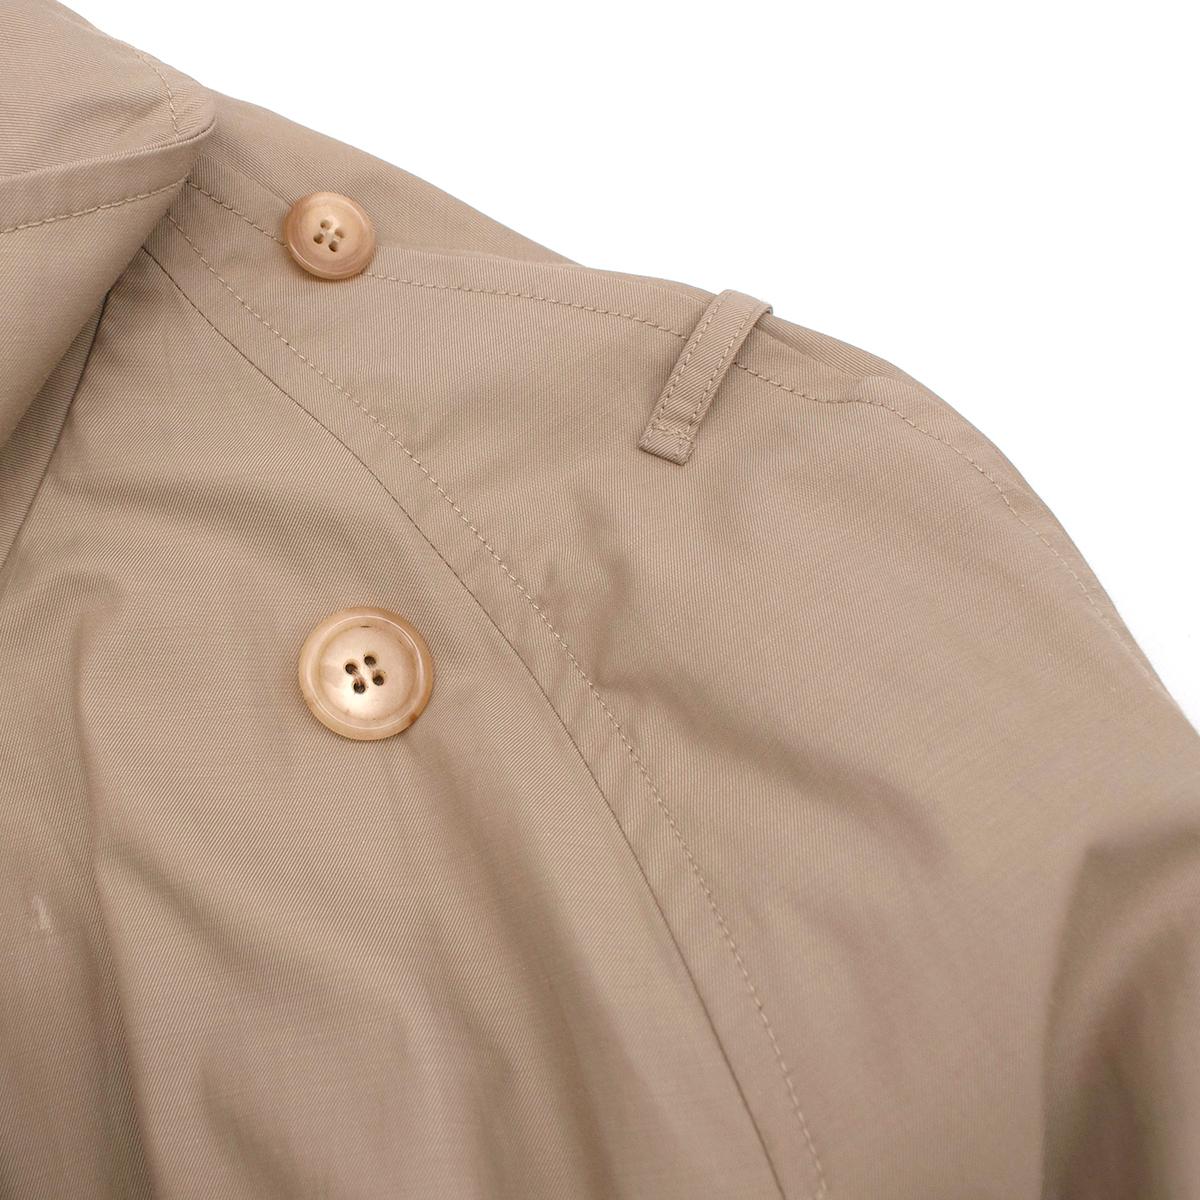 J.W. Anderson Beige Oversized Trench Coat - Size XS In Excellent Condition For Sale In London, GB